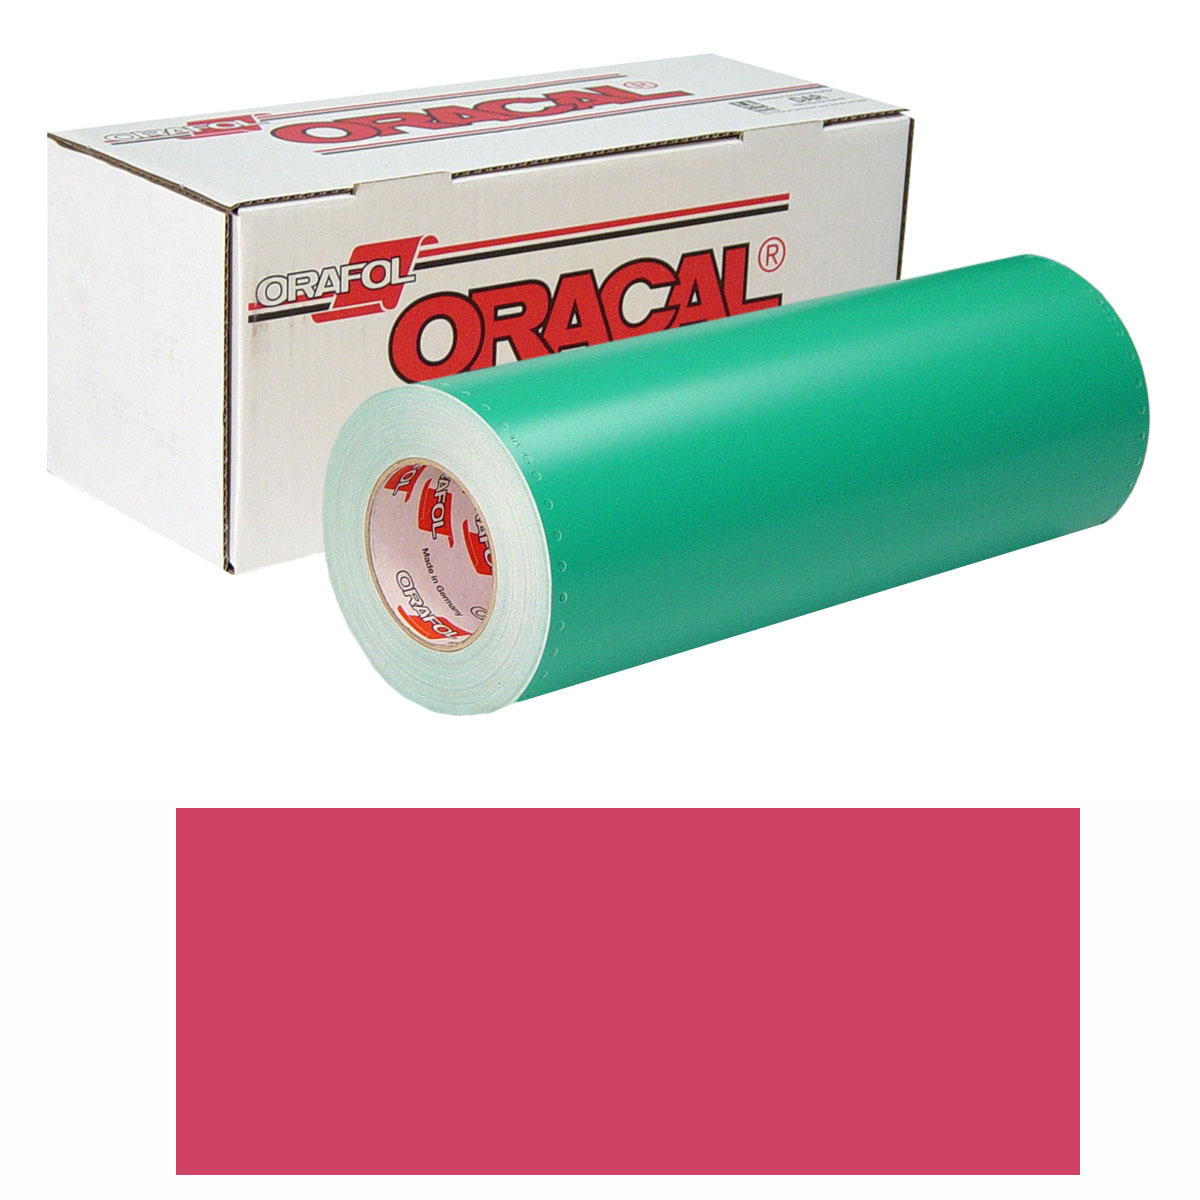 ORACAL 8500 15in X 10yd 017 Cherry Red